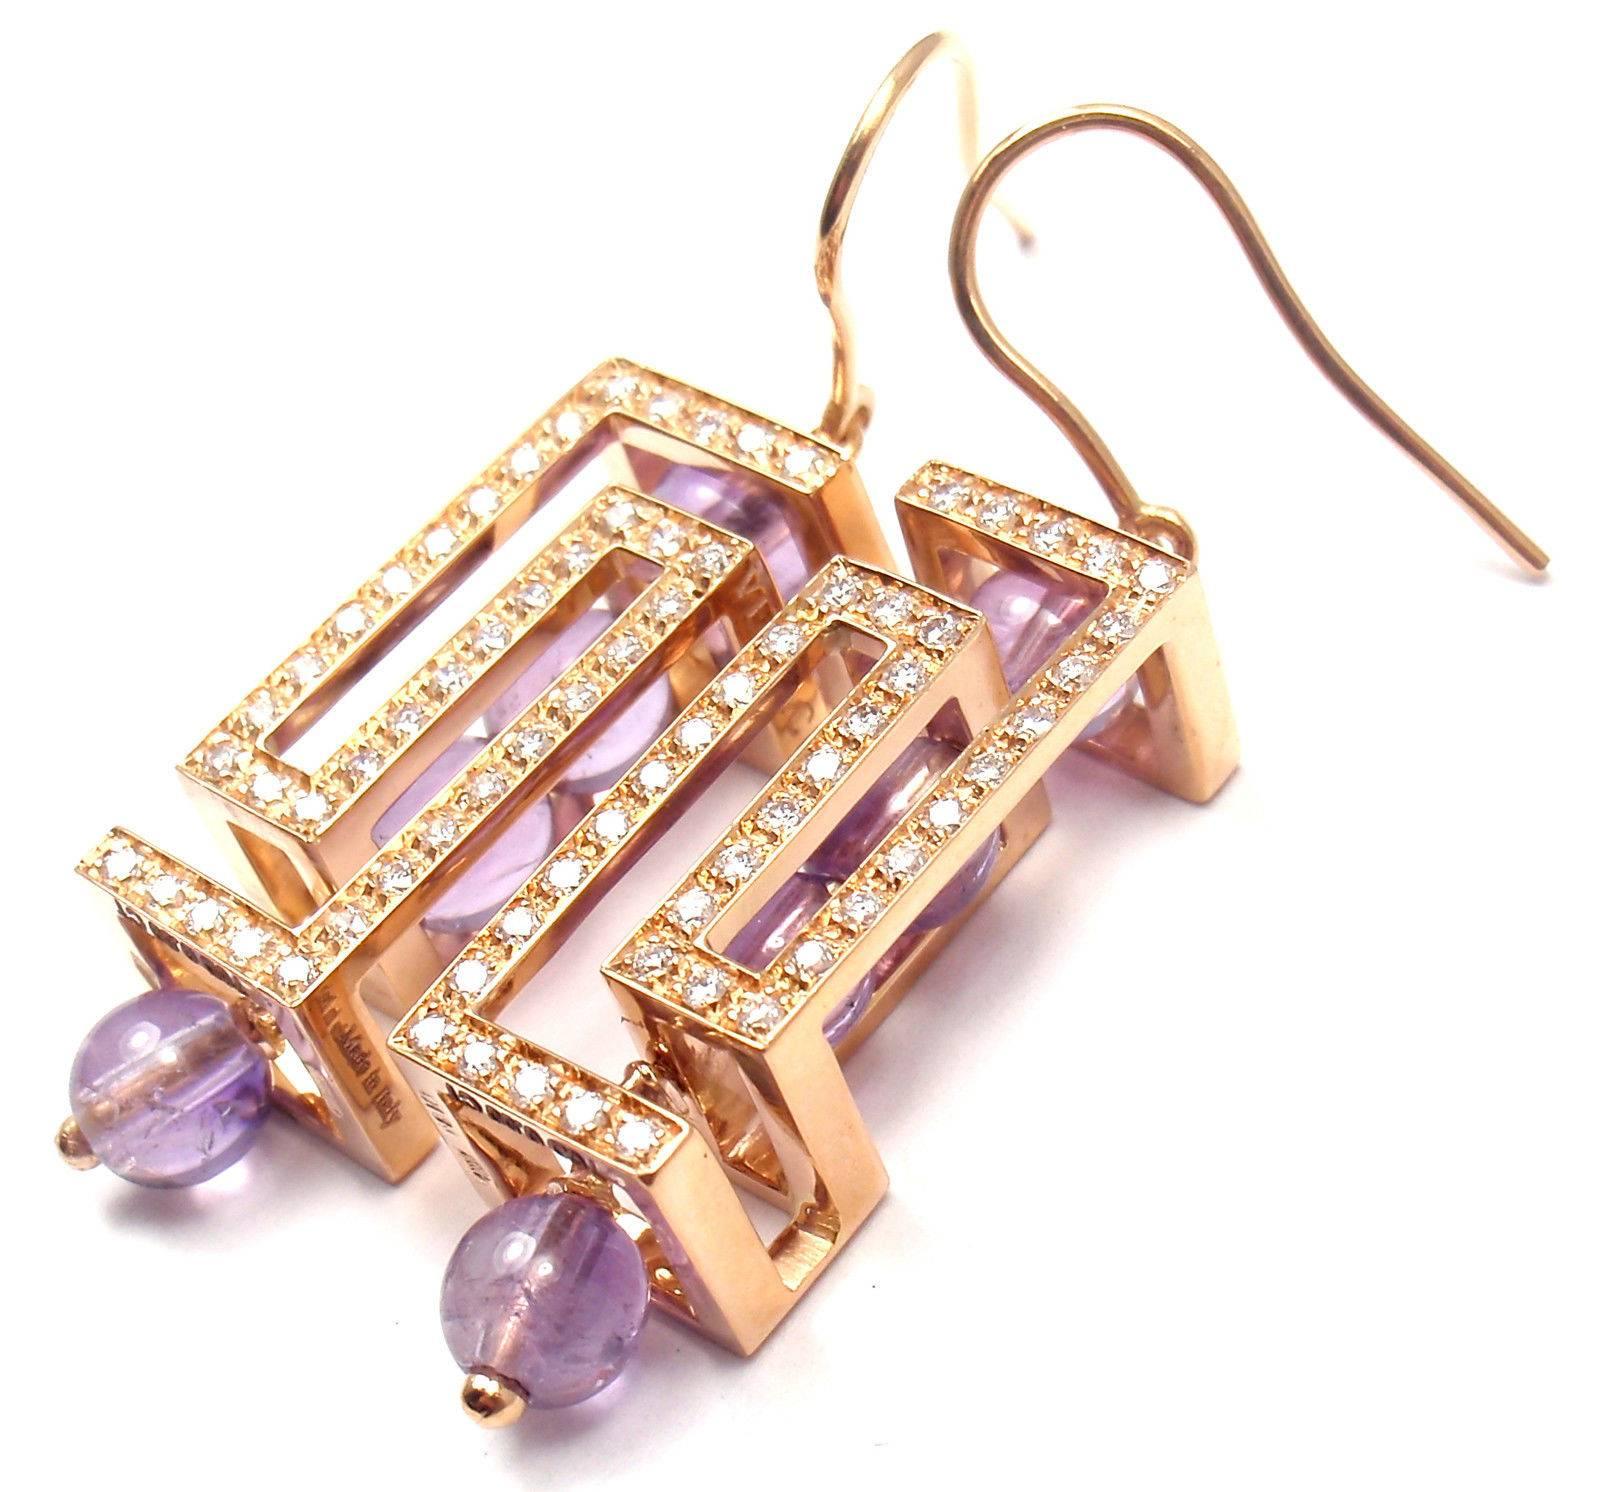 18k Rose Gold Fedra Diamond And Amethyst Earrings By Versace. 
With 76 round brilliant cut diamonds VS clarity, G color total weight approx .76ct 
8 round amethyst
These earrings come with box and certificate of authenticity.  
Details: 